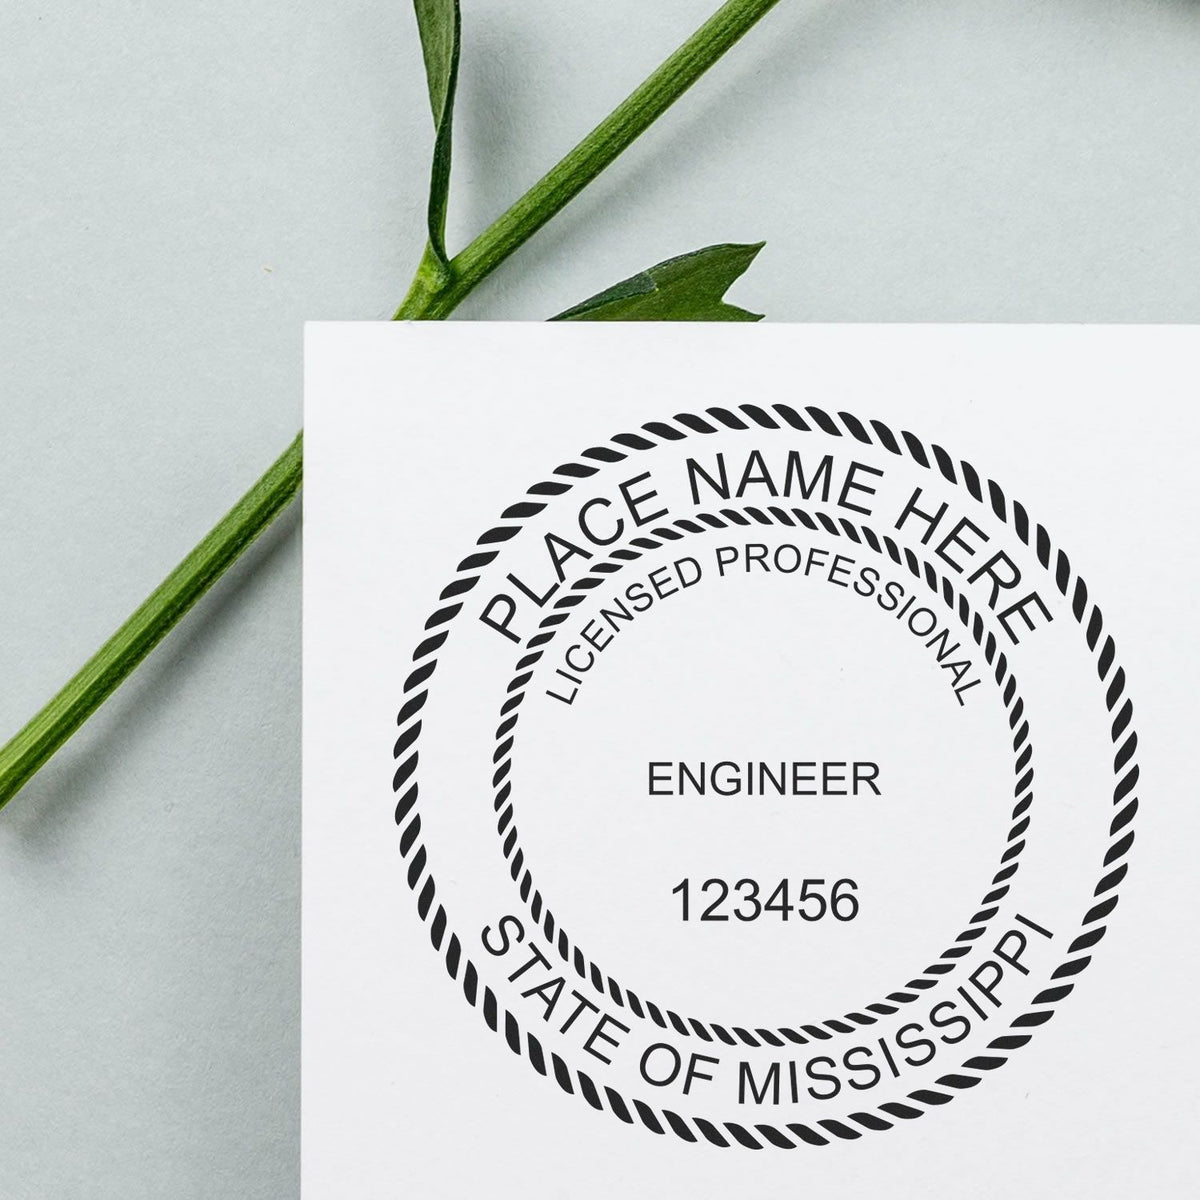 A lifestyle photo showing a stamped image of the Digital Mississippi PE Stamp and Electronic Seal for Mississippi Engineer on a piece of paper